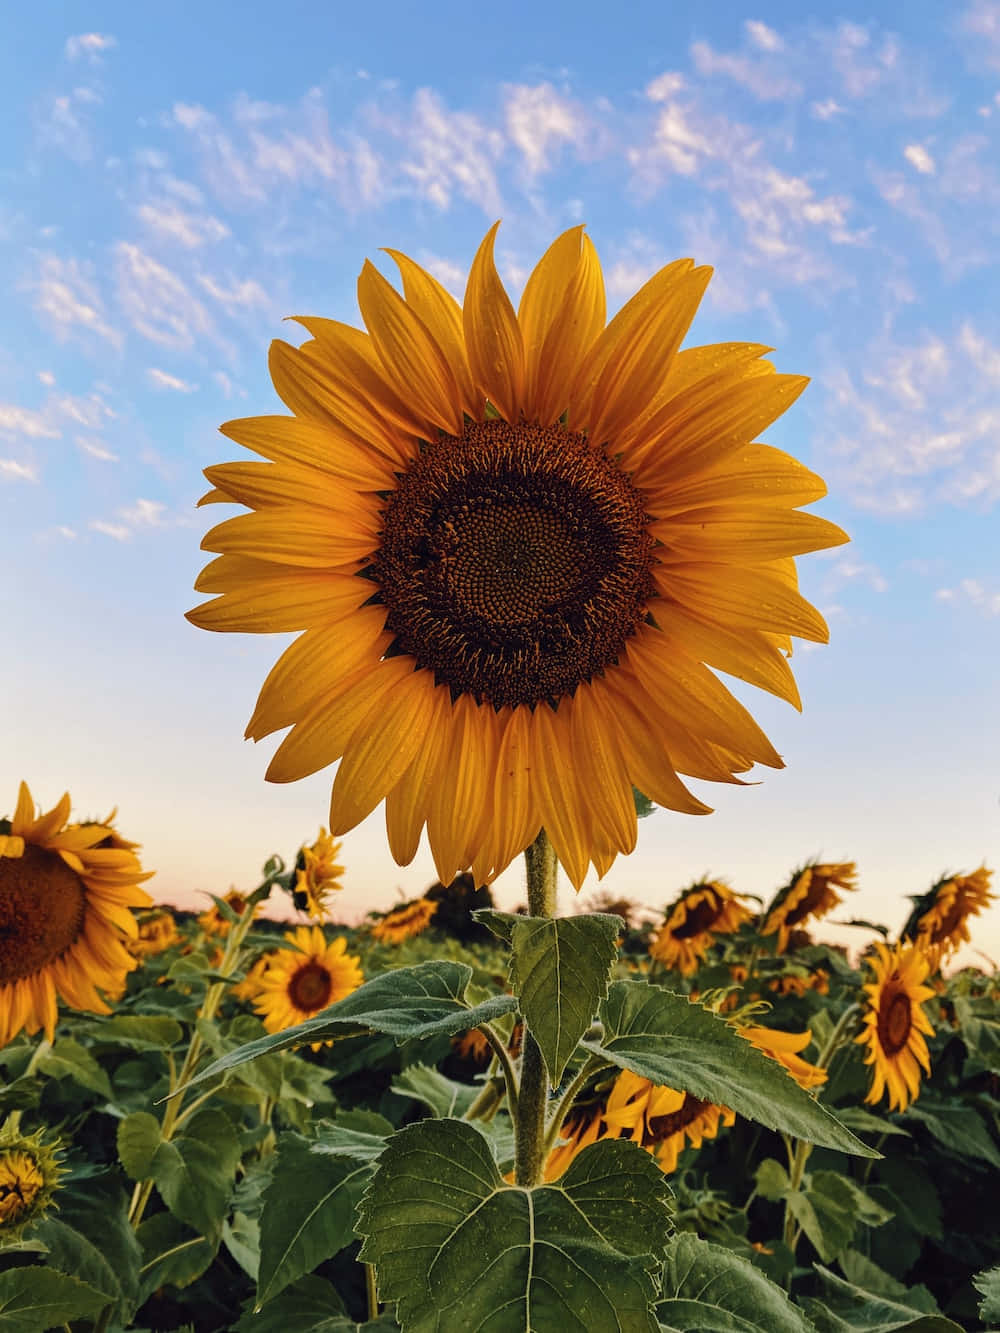 A Vibrantly Colored Sunflower with Sun Rays Beaming Down